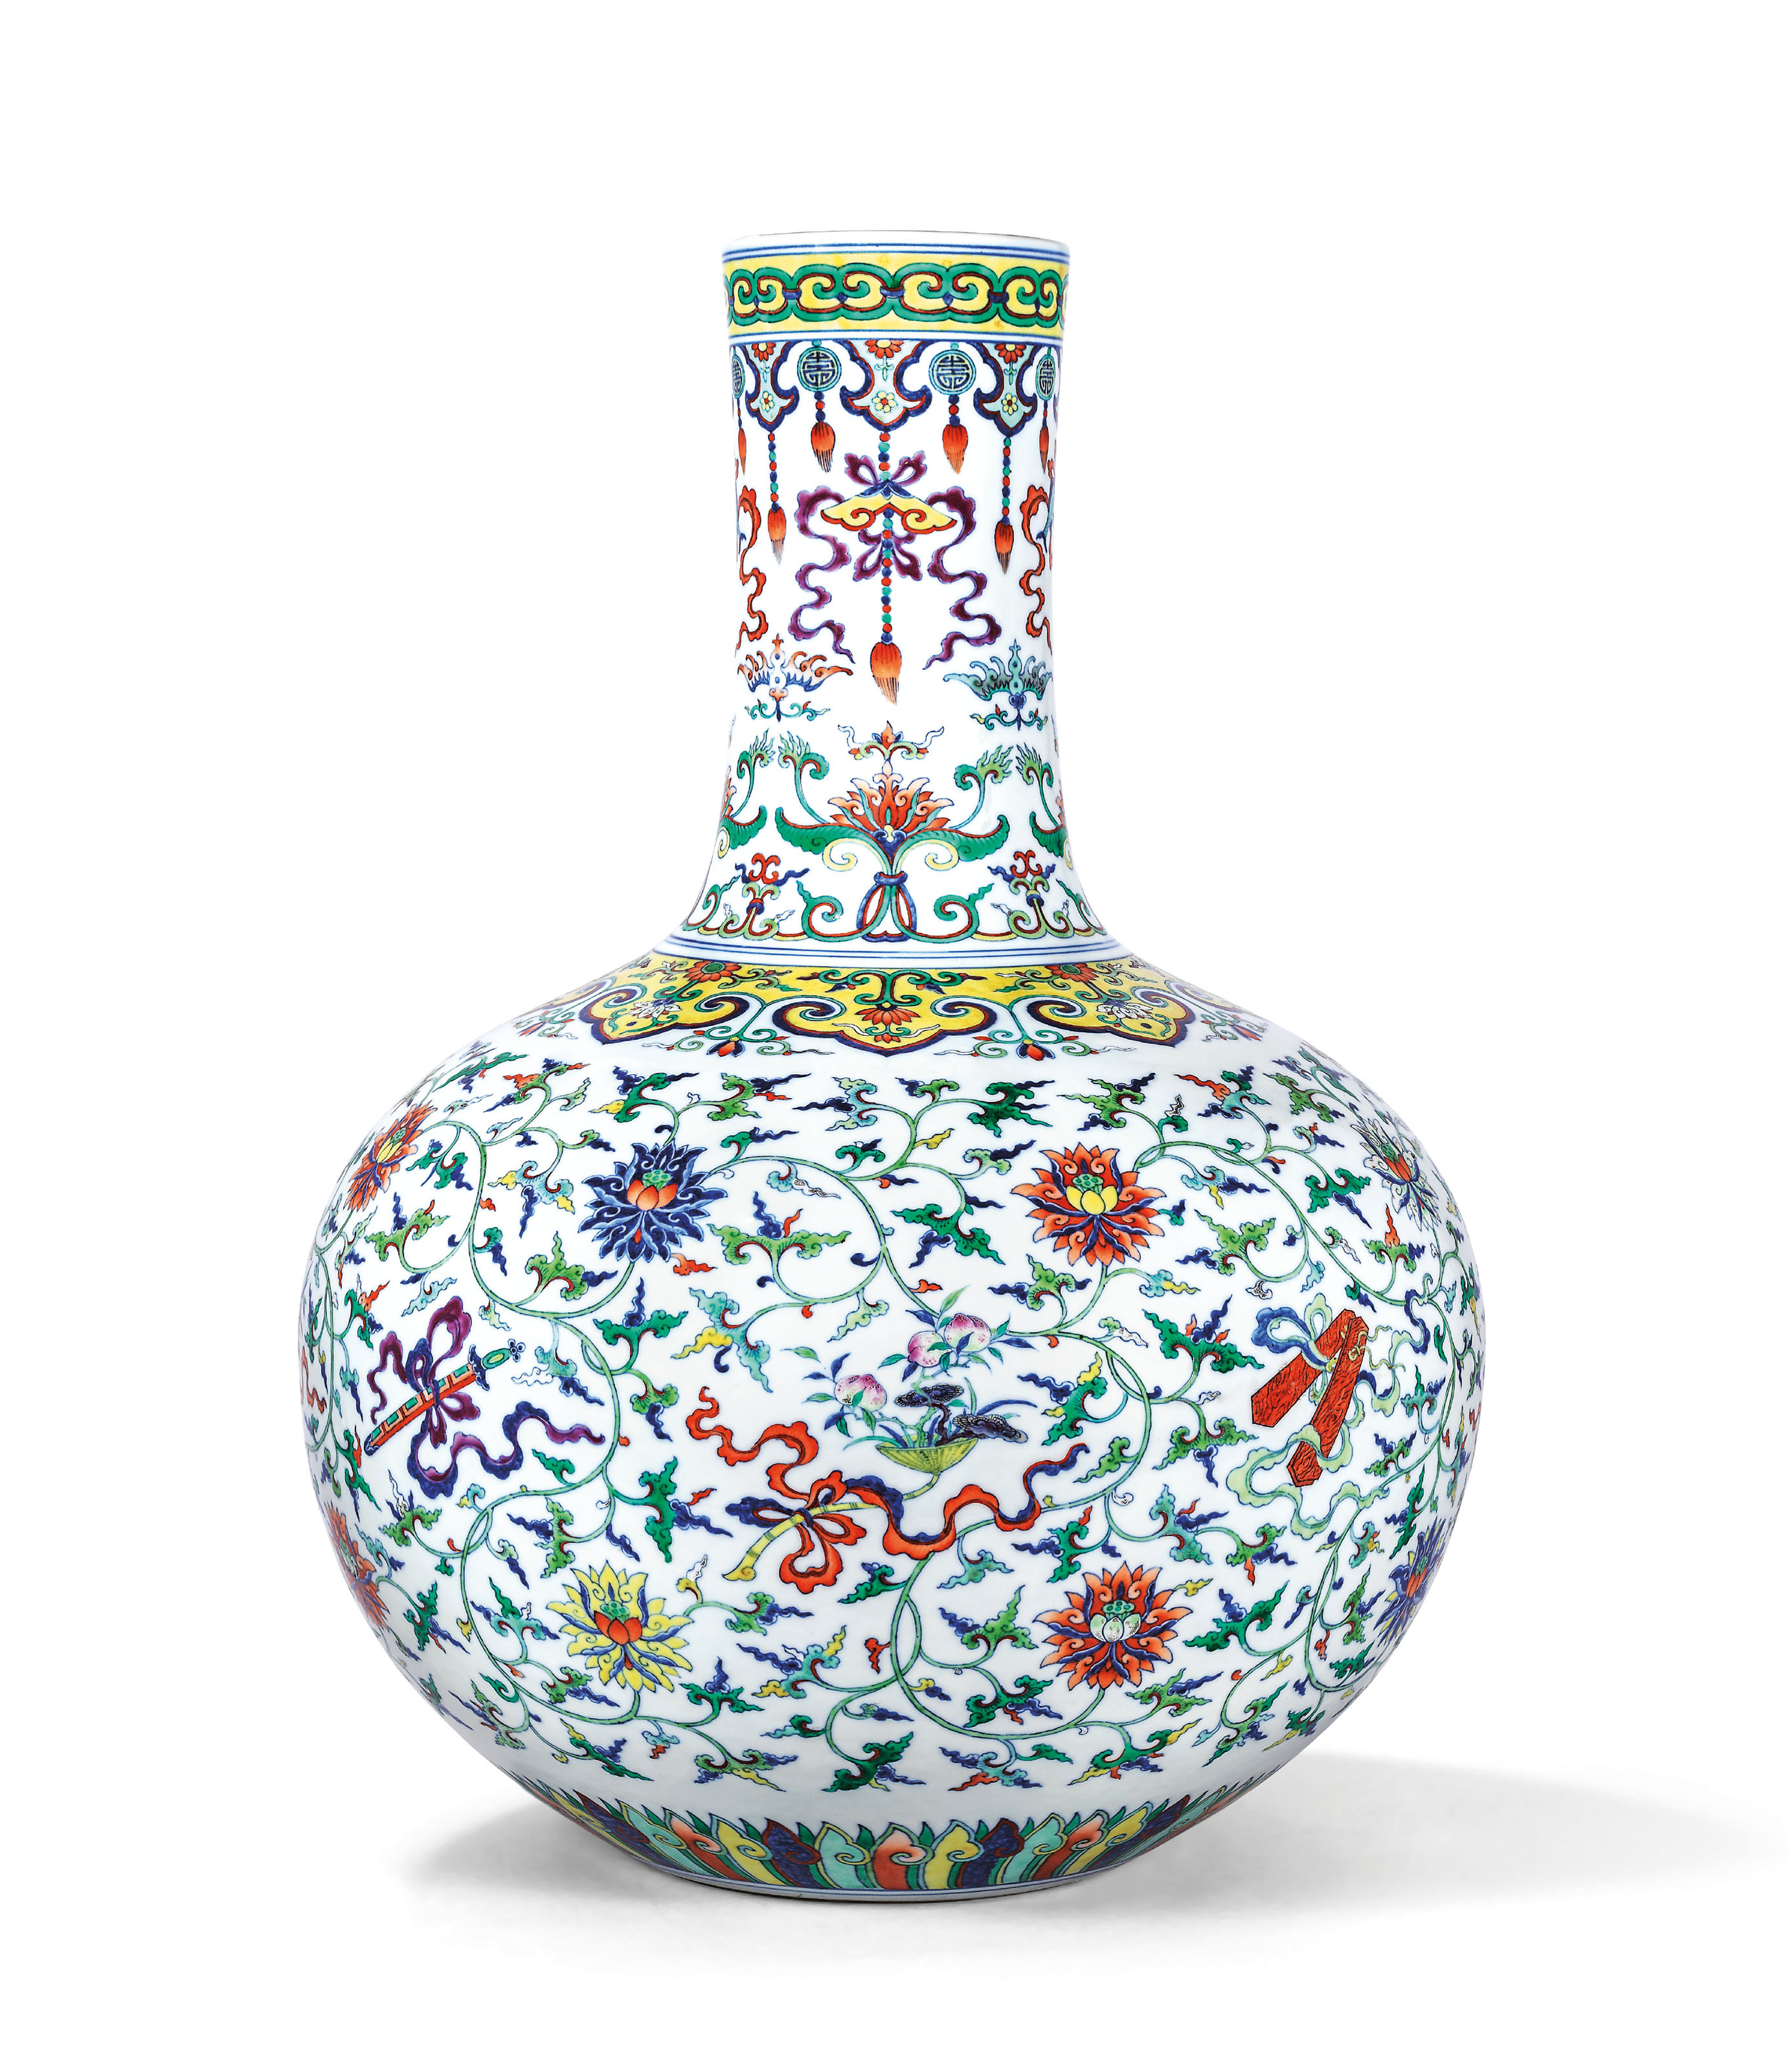 16 Famous Plastic Cemetery Vases with Stakes 10 2024 free download plastic cemetery vases with stakes 10 of philbrook museum regarding this rare chinese vase languished in storage at an oklahoma museum for over a decade then it sold for 14 5 million